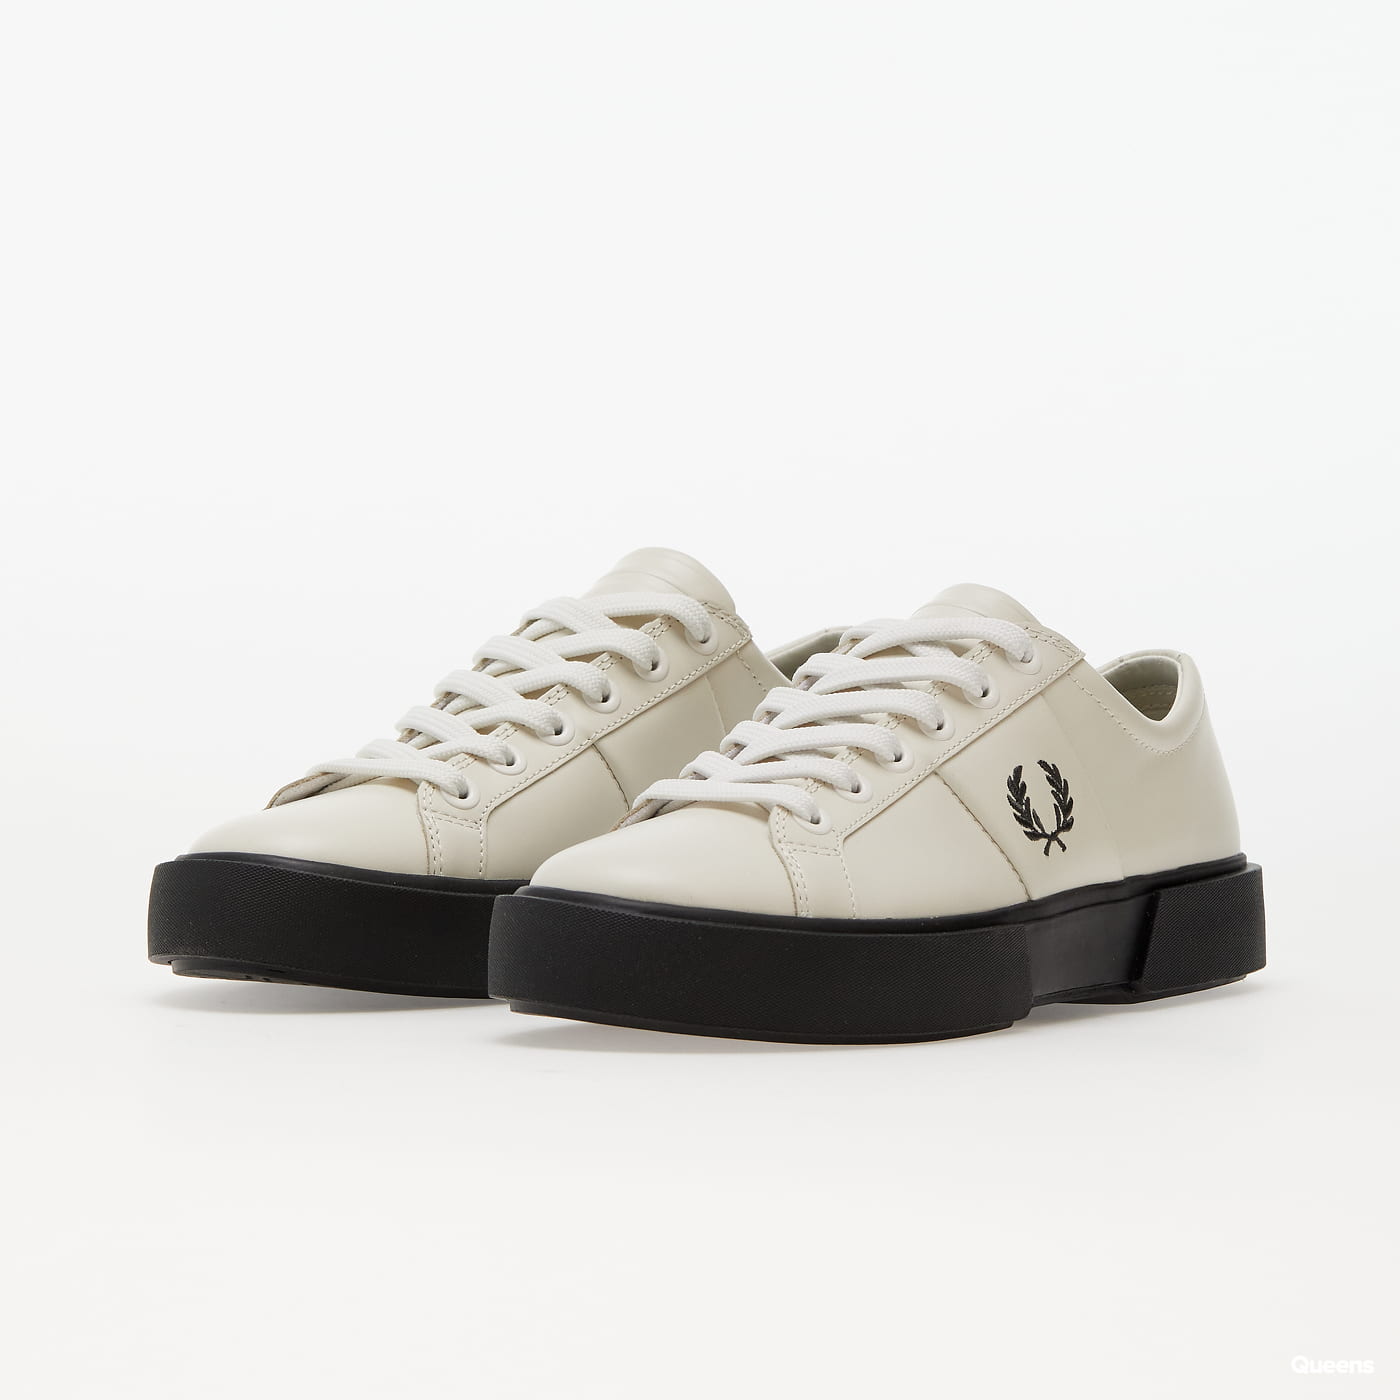 FRED PERRY B70 Leather Porcelain Fred Perry